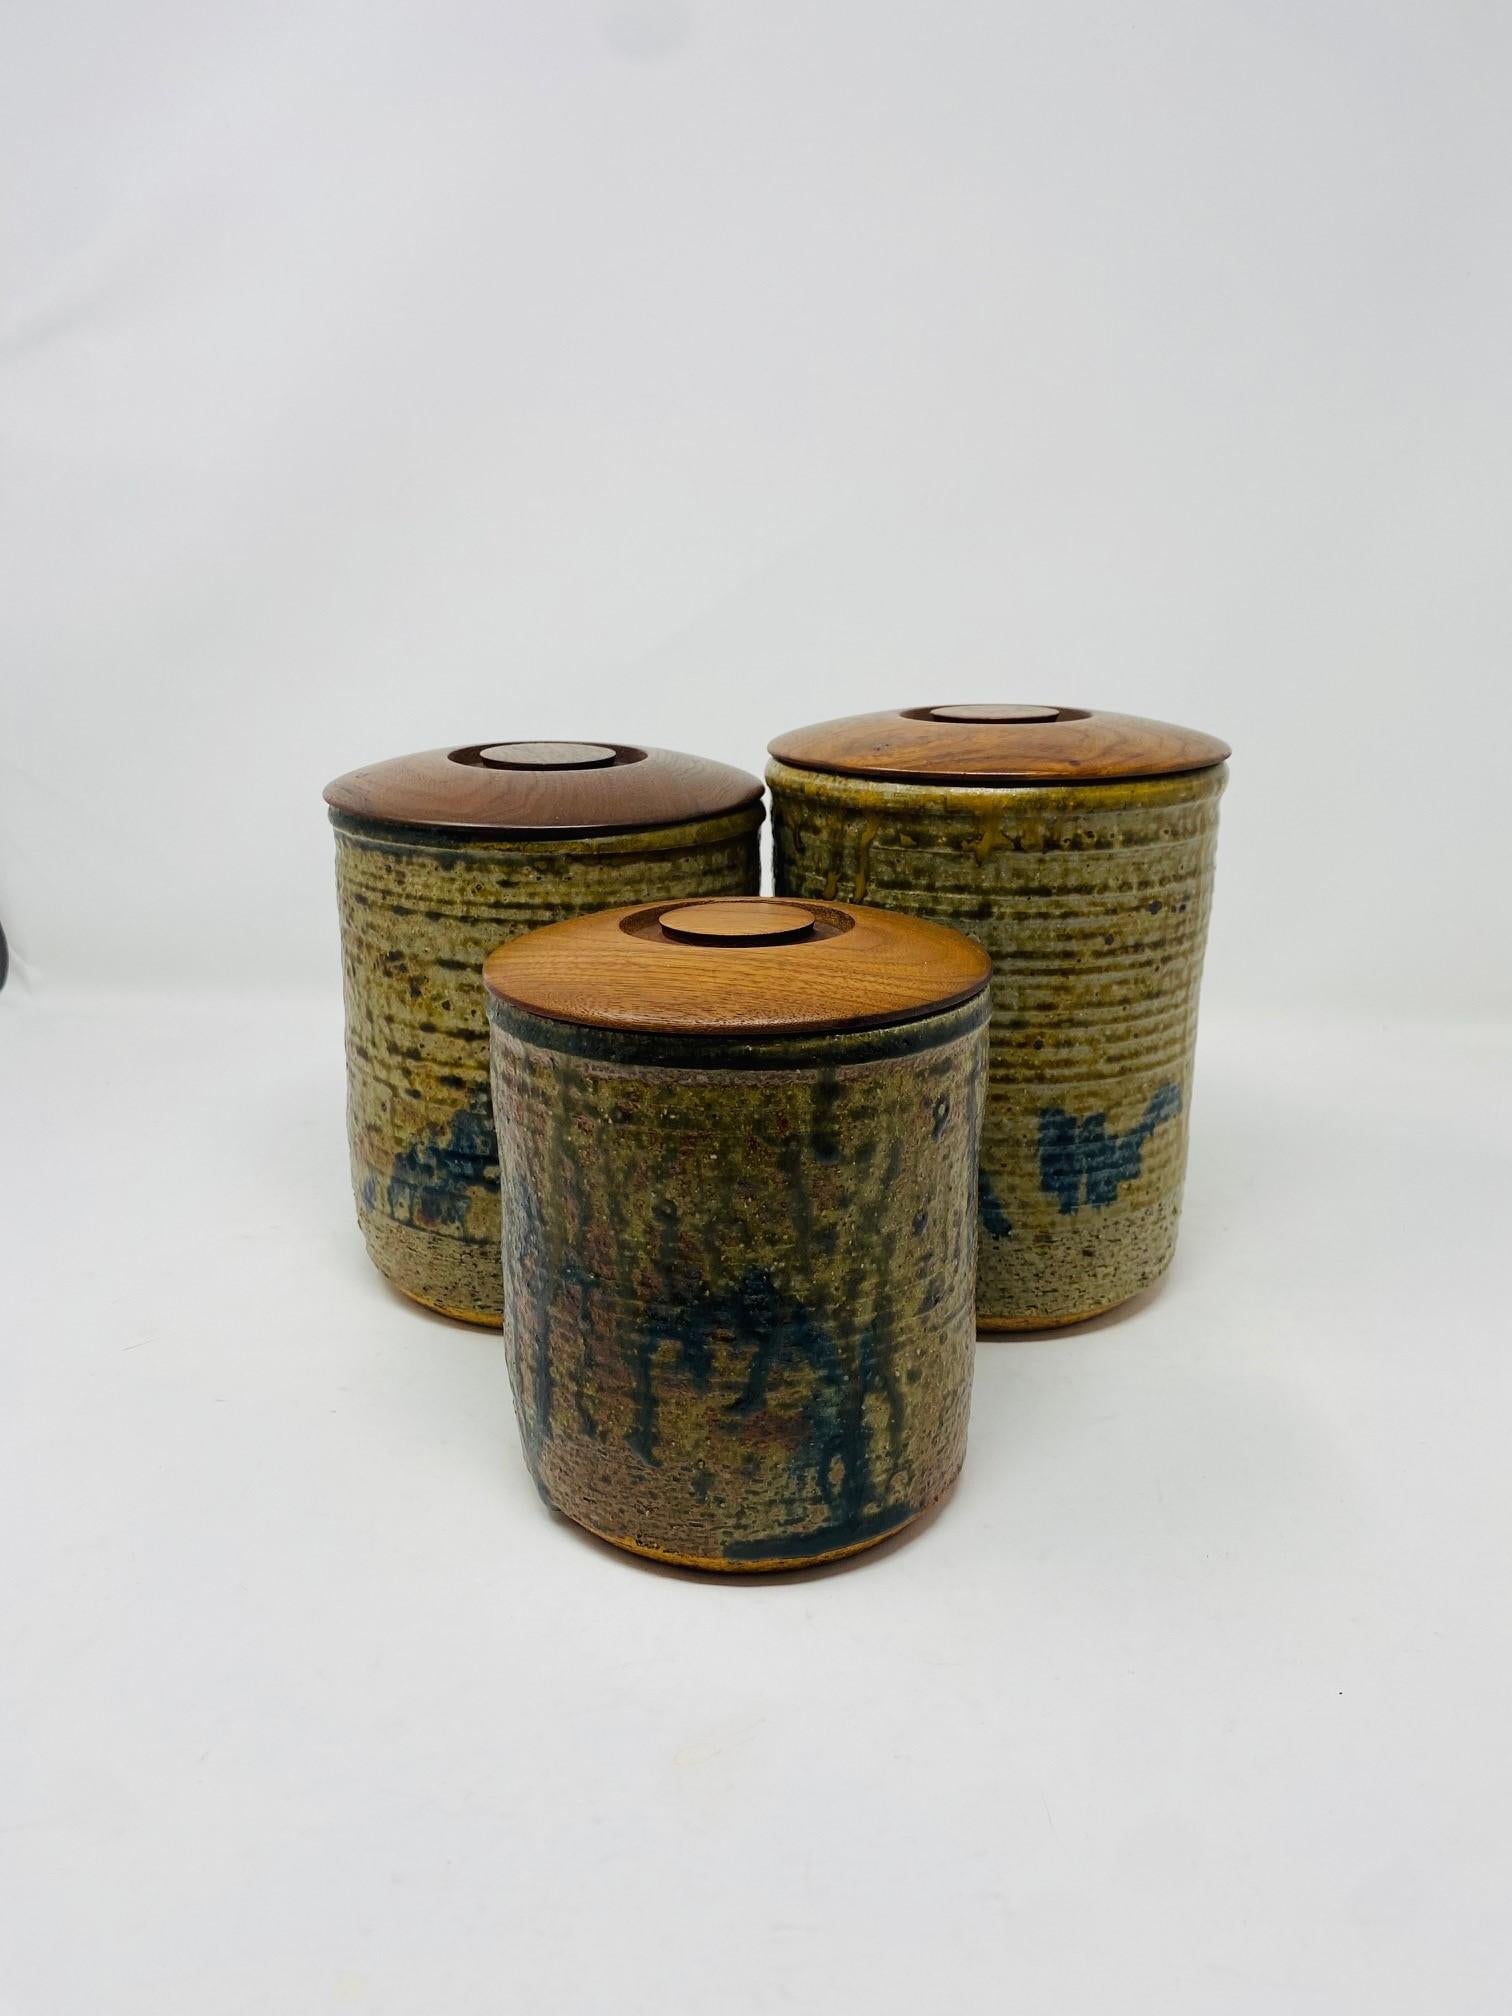 American Vintage Mid-Century Set of 3 Ceramic Canisters with Wooden Lids Studio Pottery For Sale